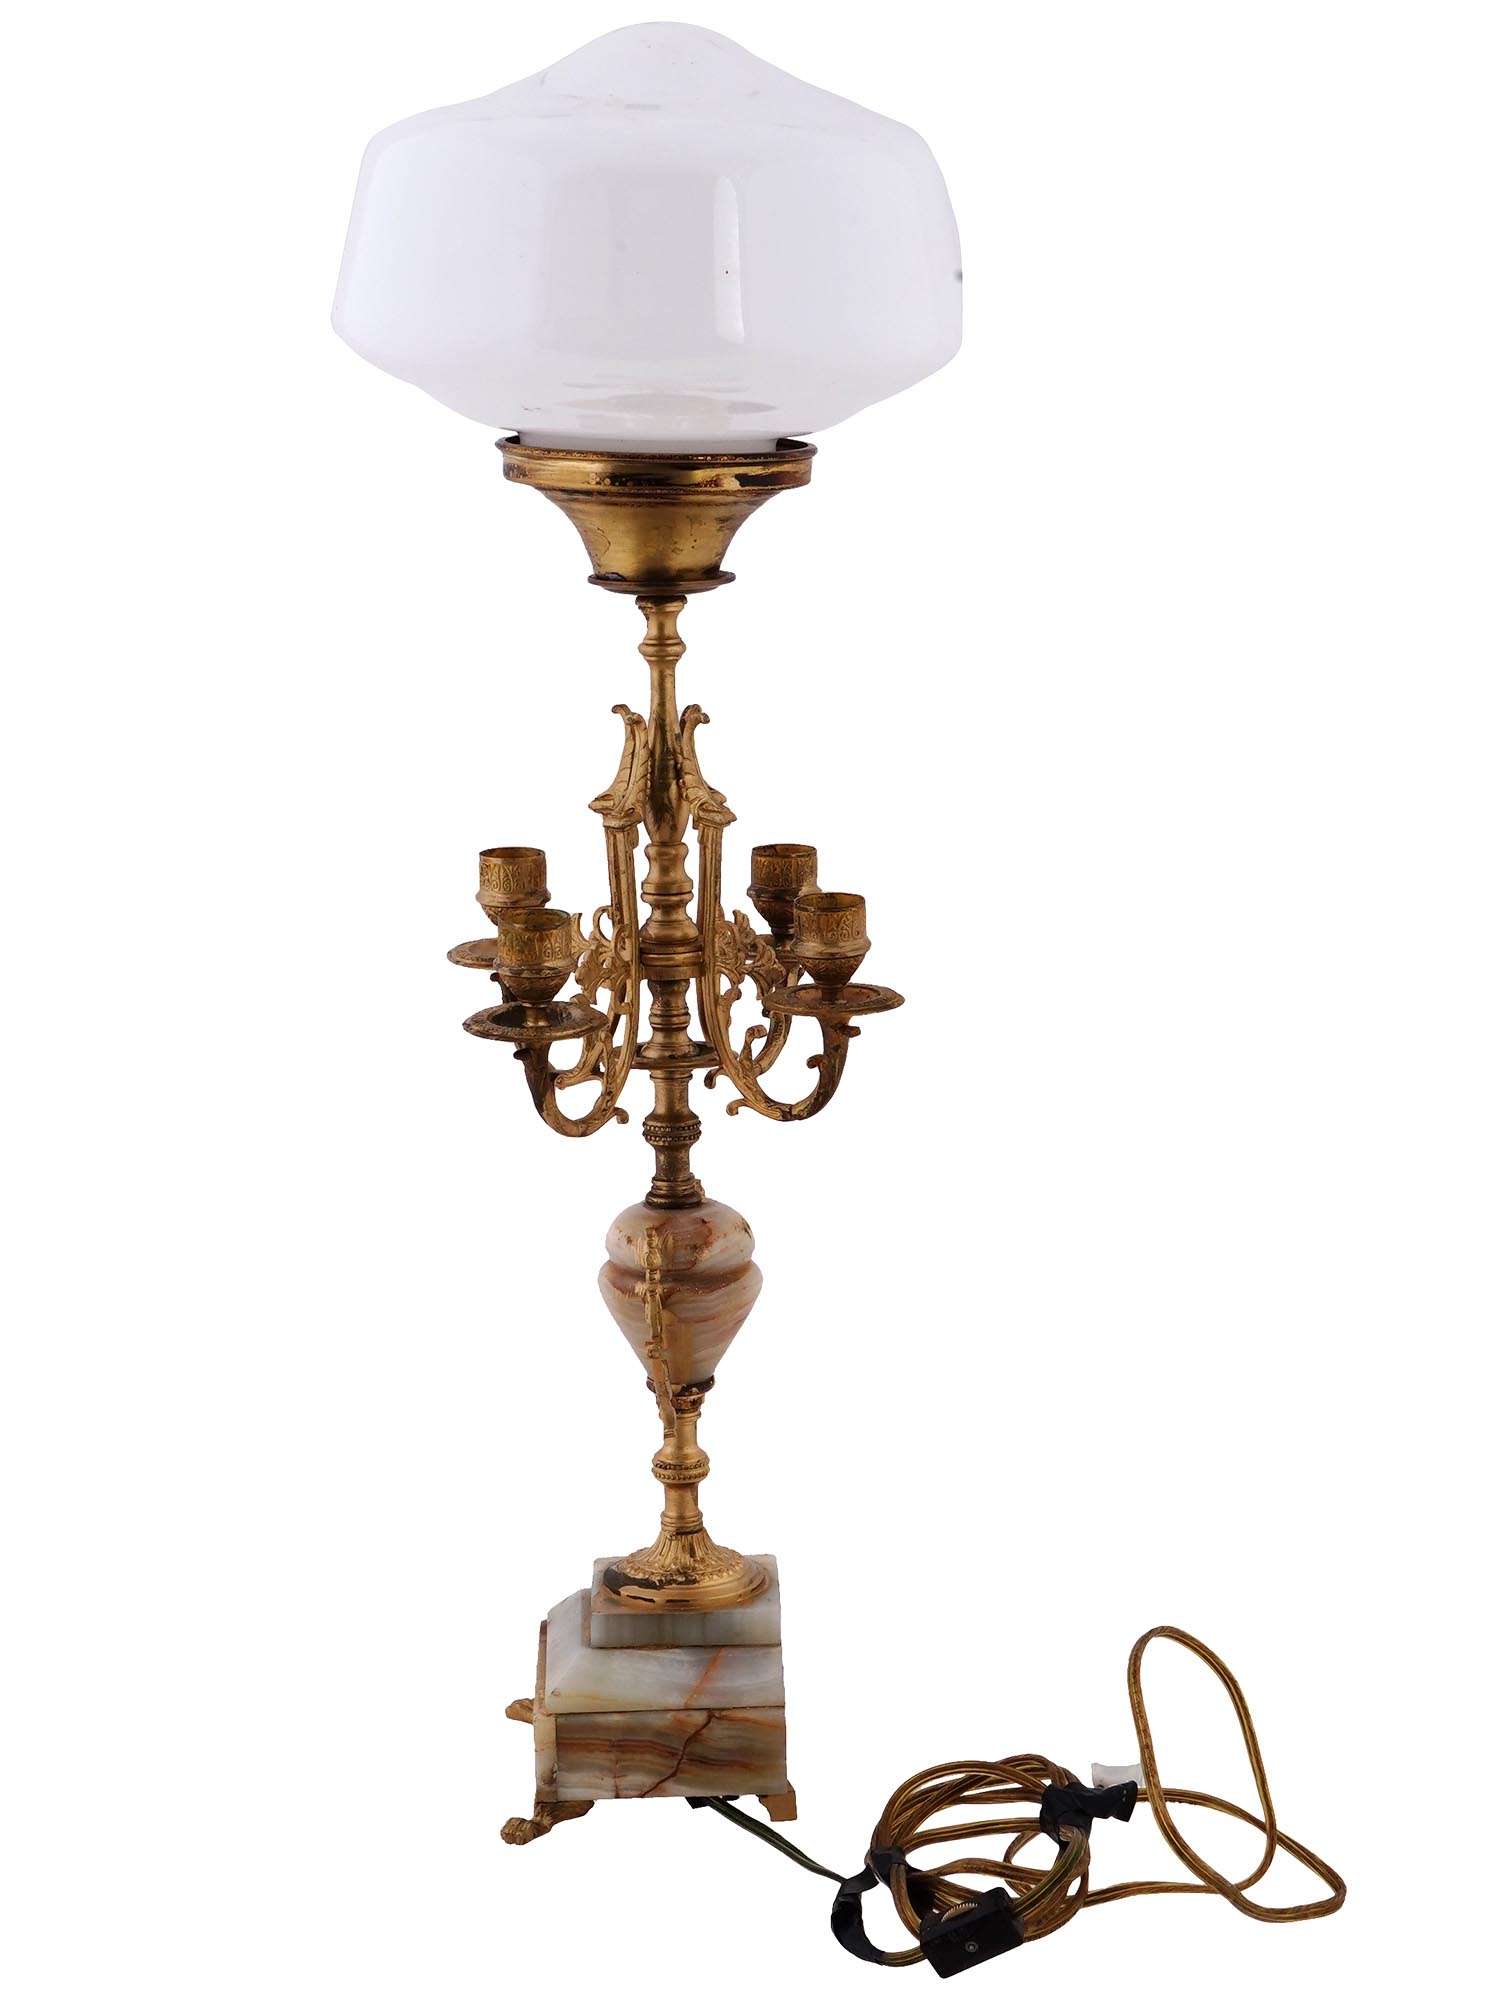 ANTIQUE FRENCH LOUIS XVI ONYX AND GILT BRONZE LAMP PIC-4